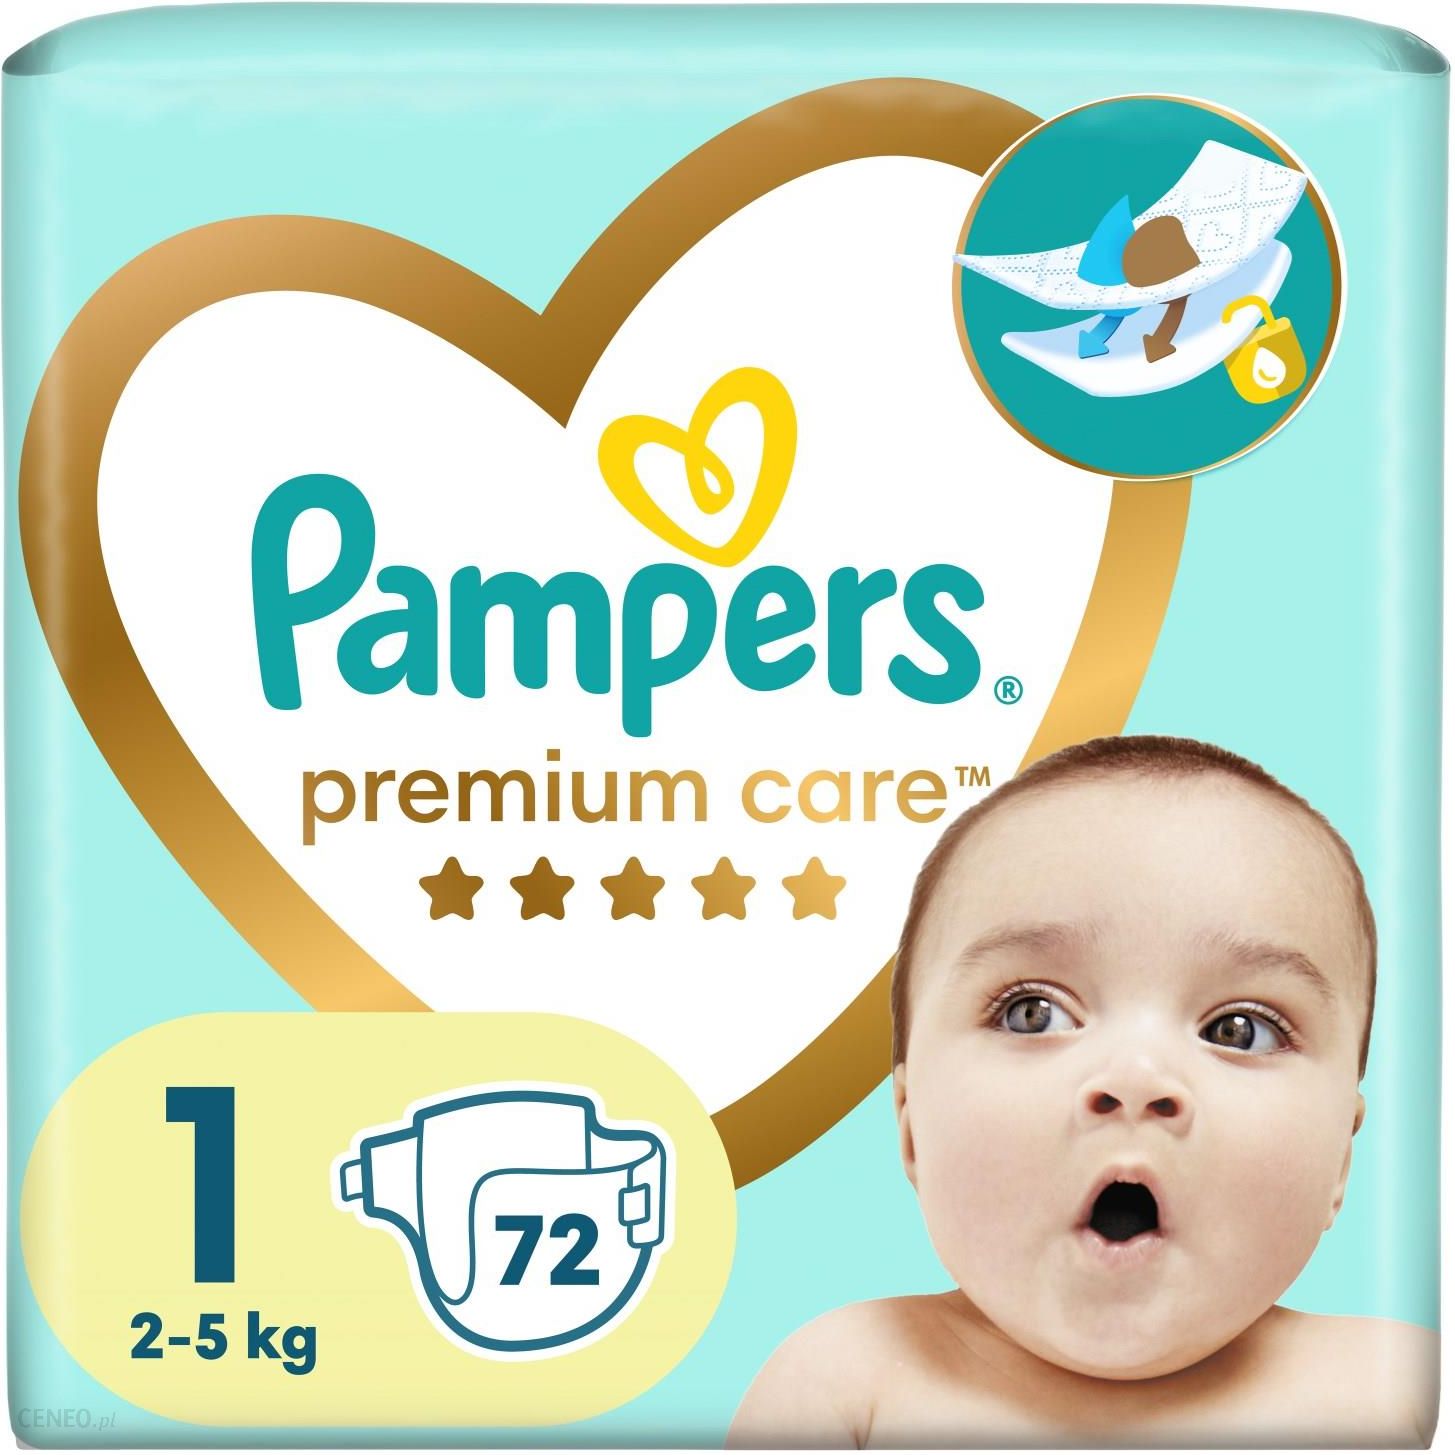 babydream vs pampers premium care